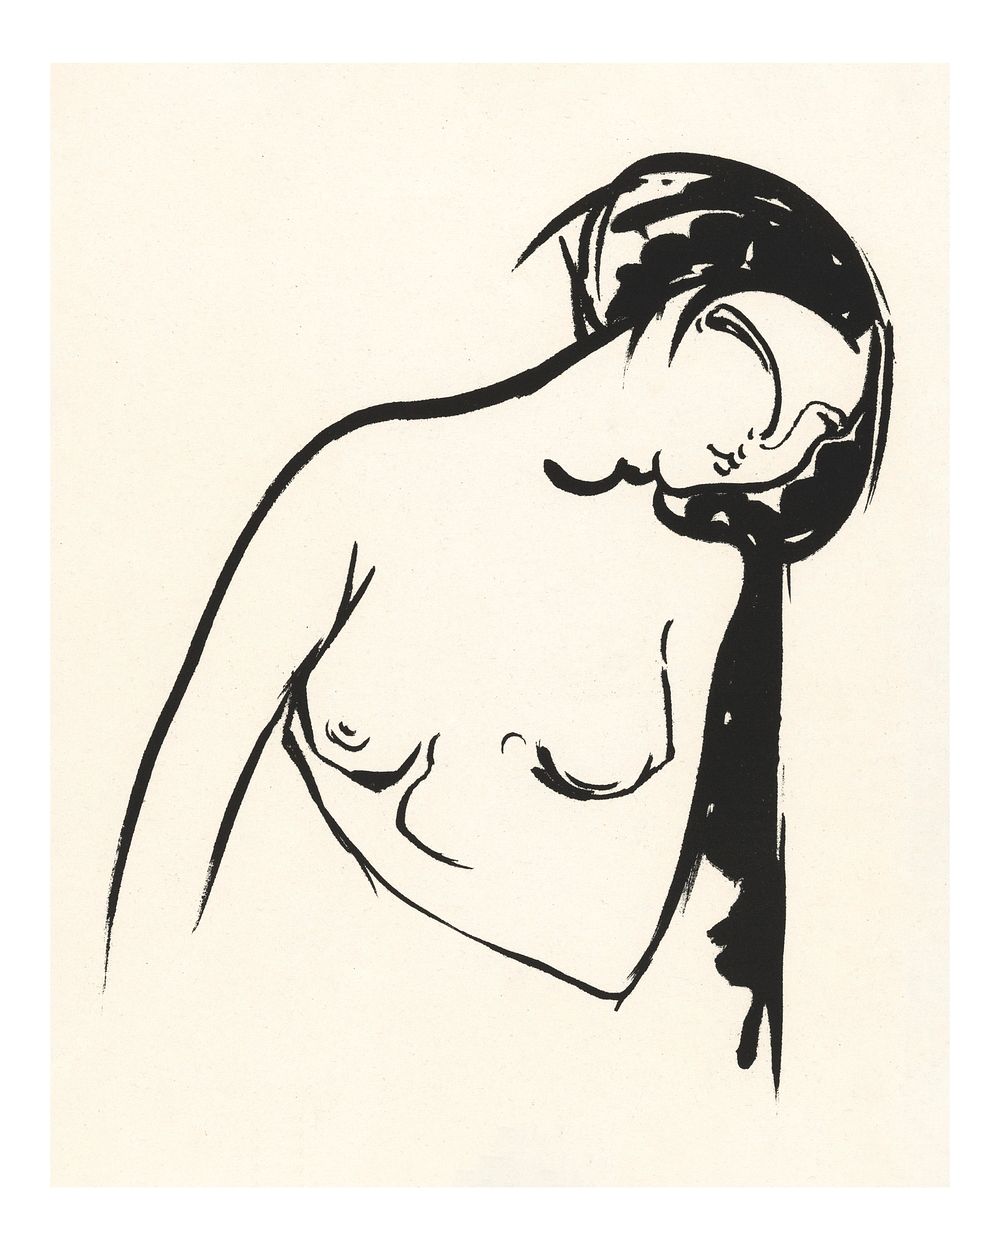 Nude woman line art poster, vintage drawing remixed from the artwork of Henri Jonas